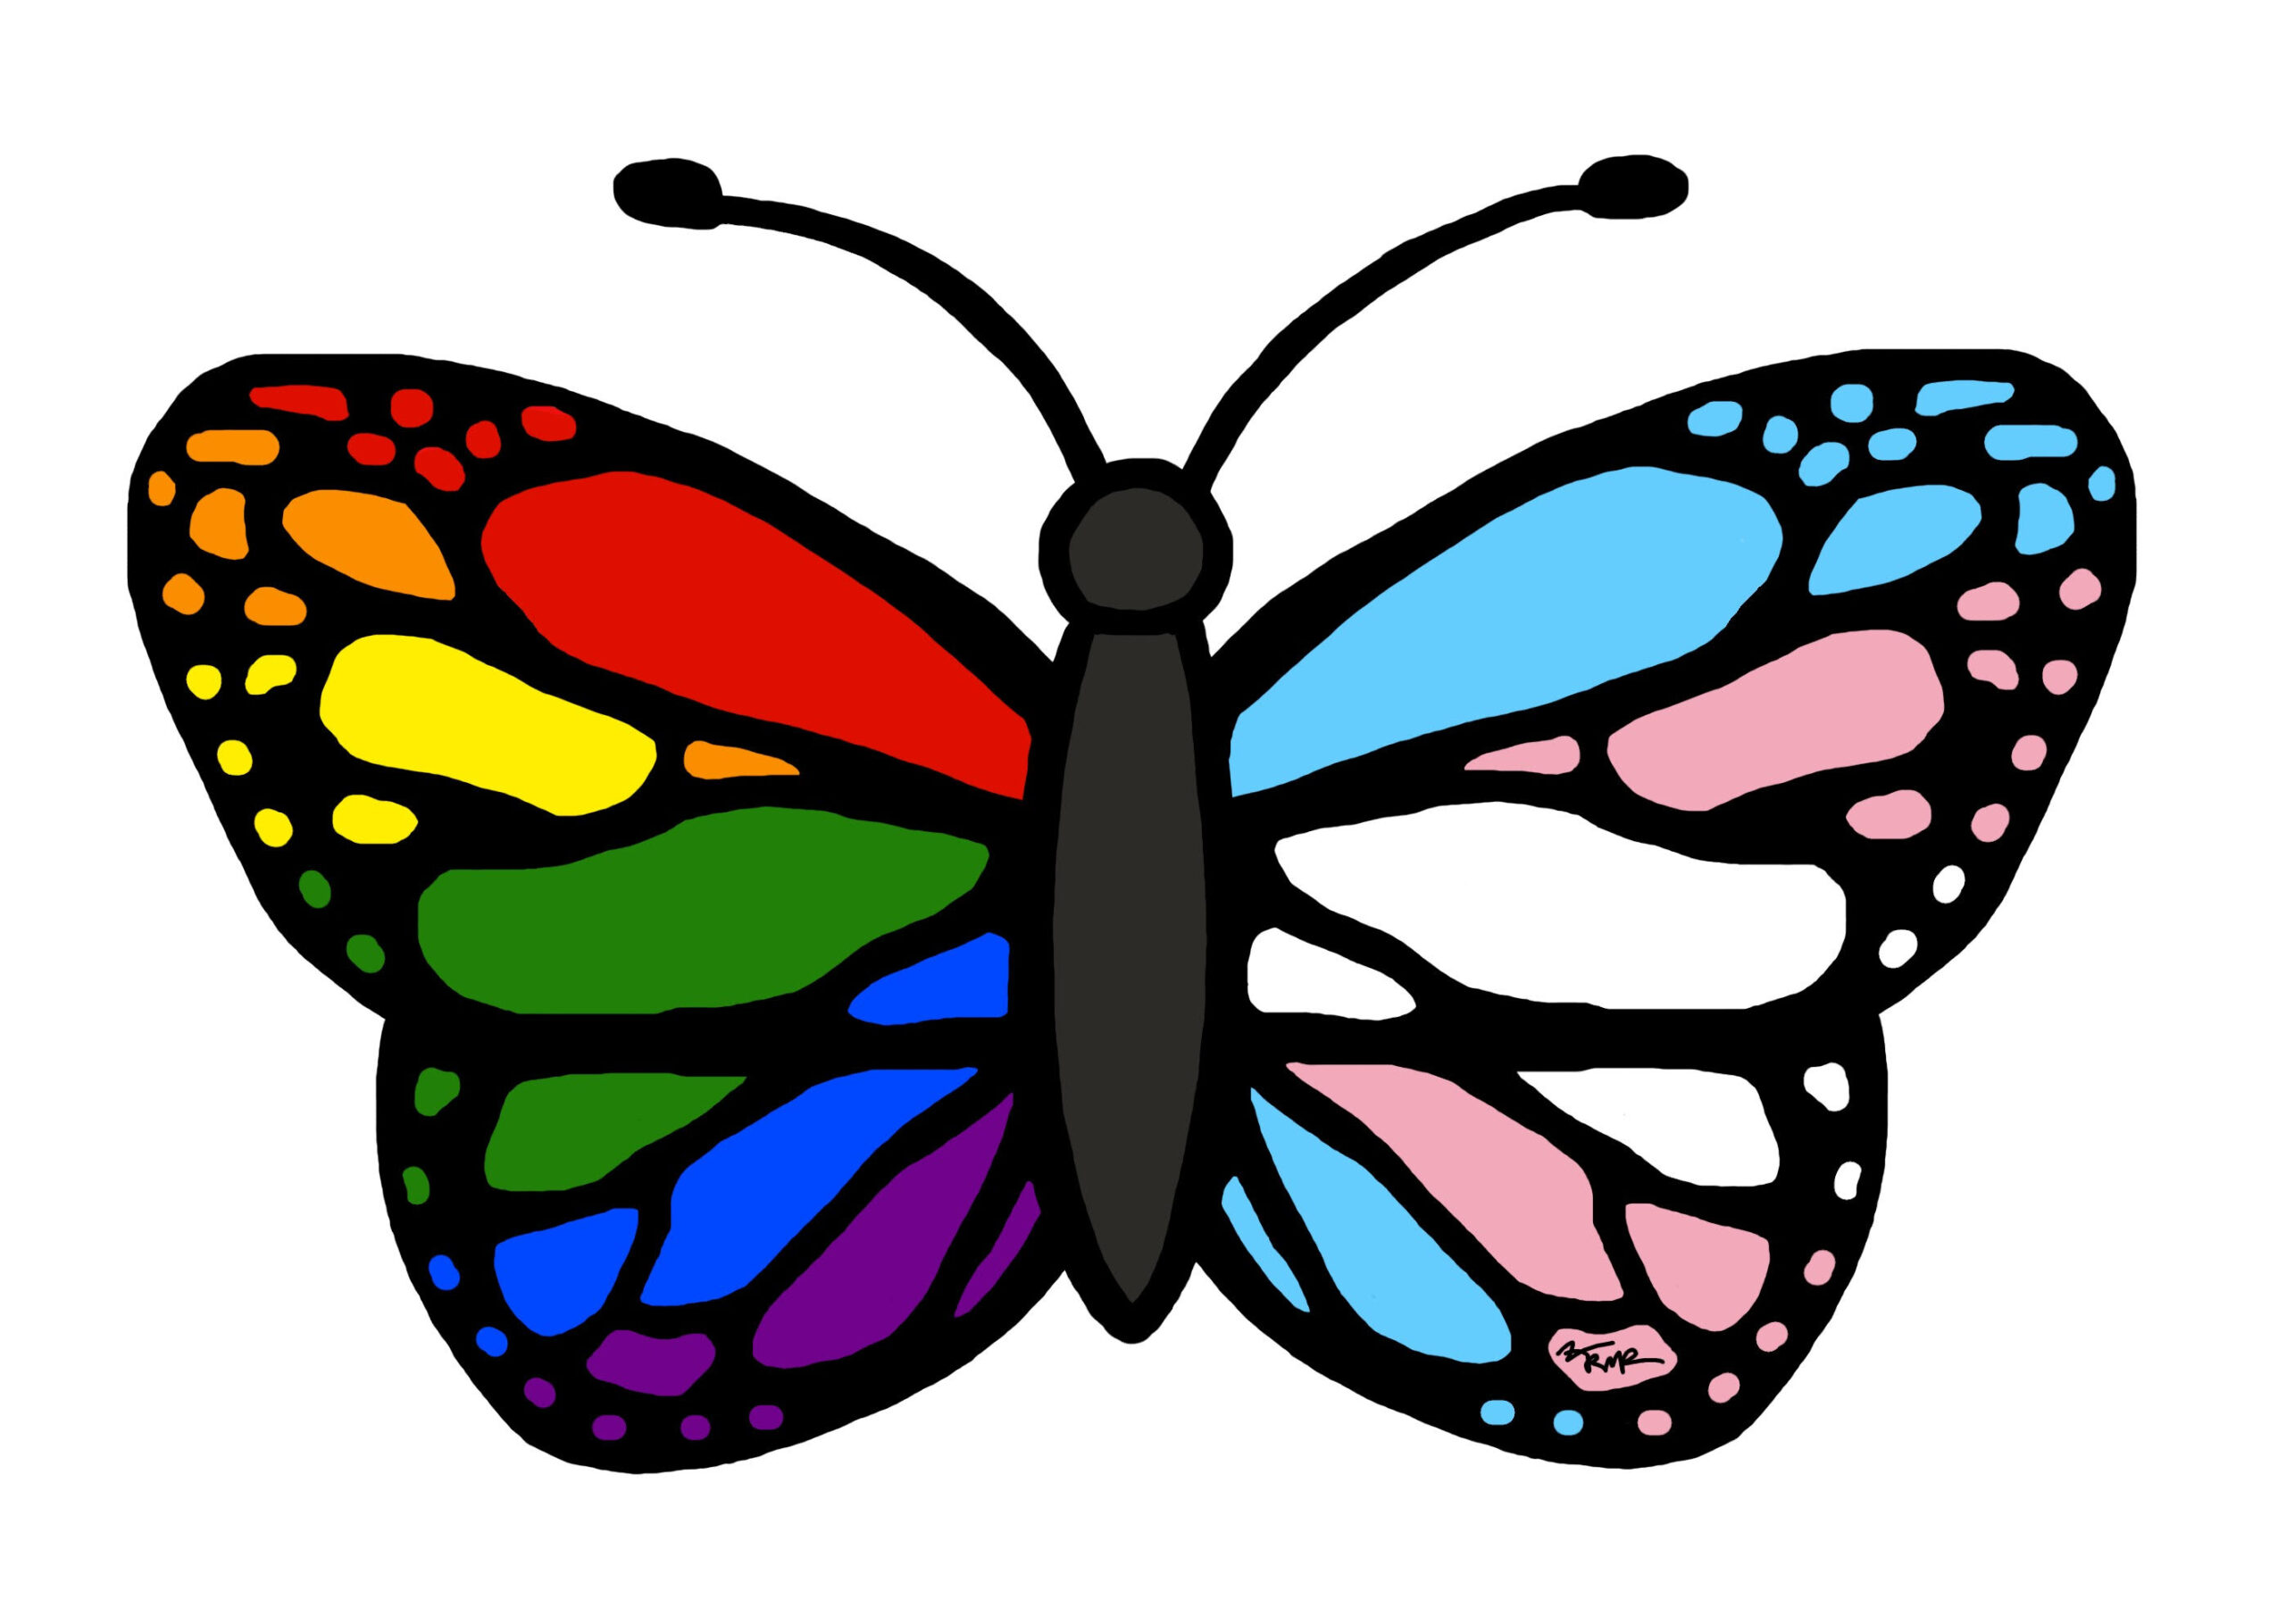 group logo - a butterfly with a rainbow wing and another wing in the trans flag colors